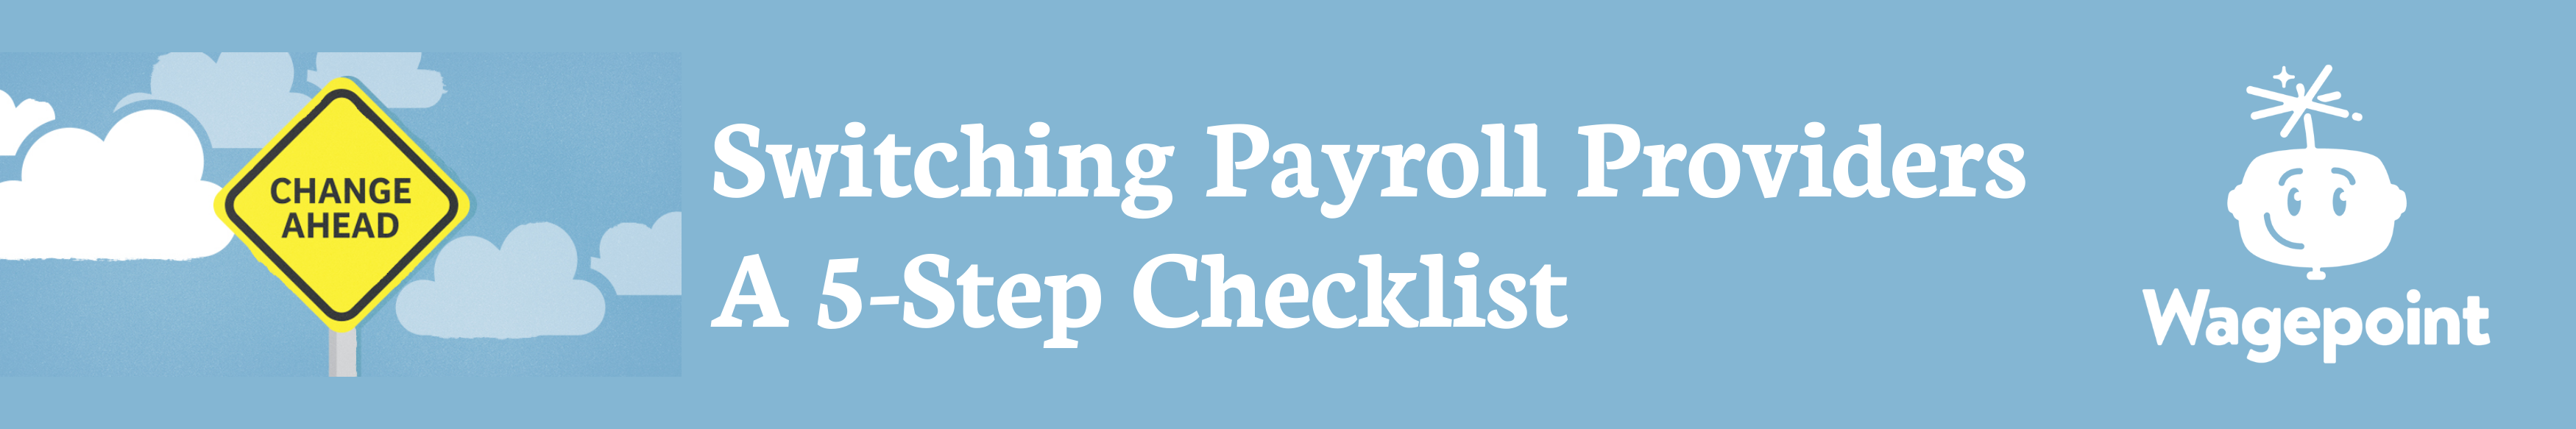 wagepoint switching payroll banner